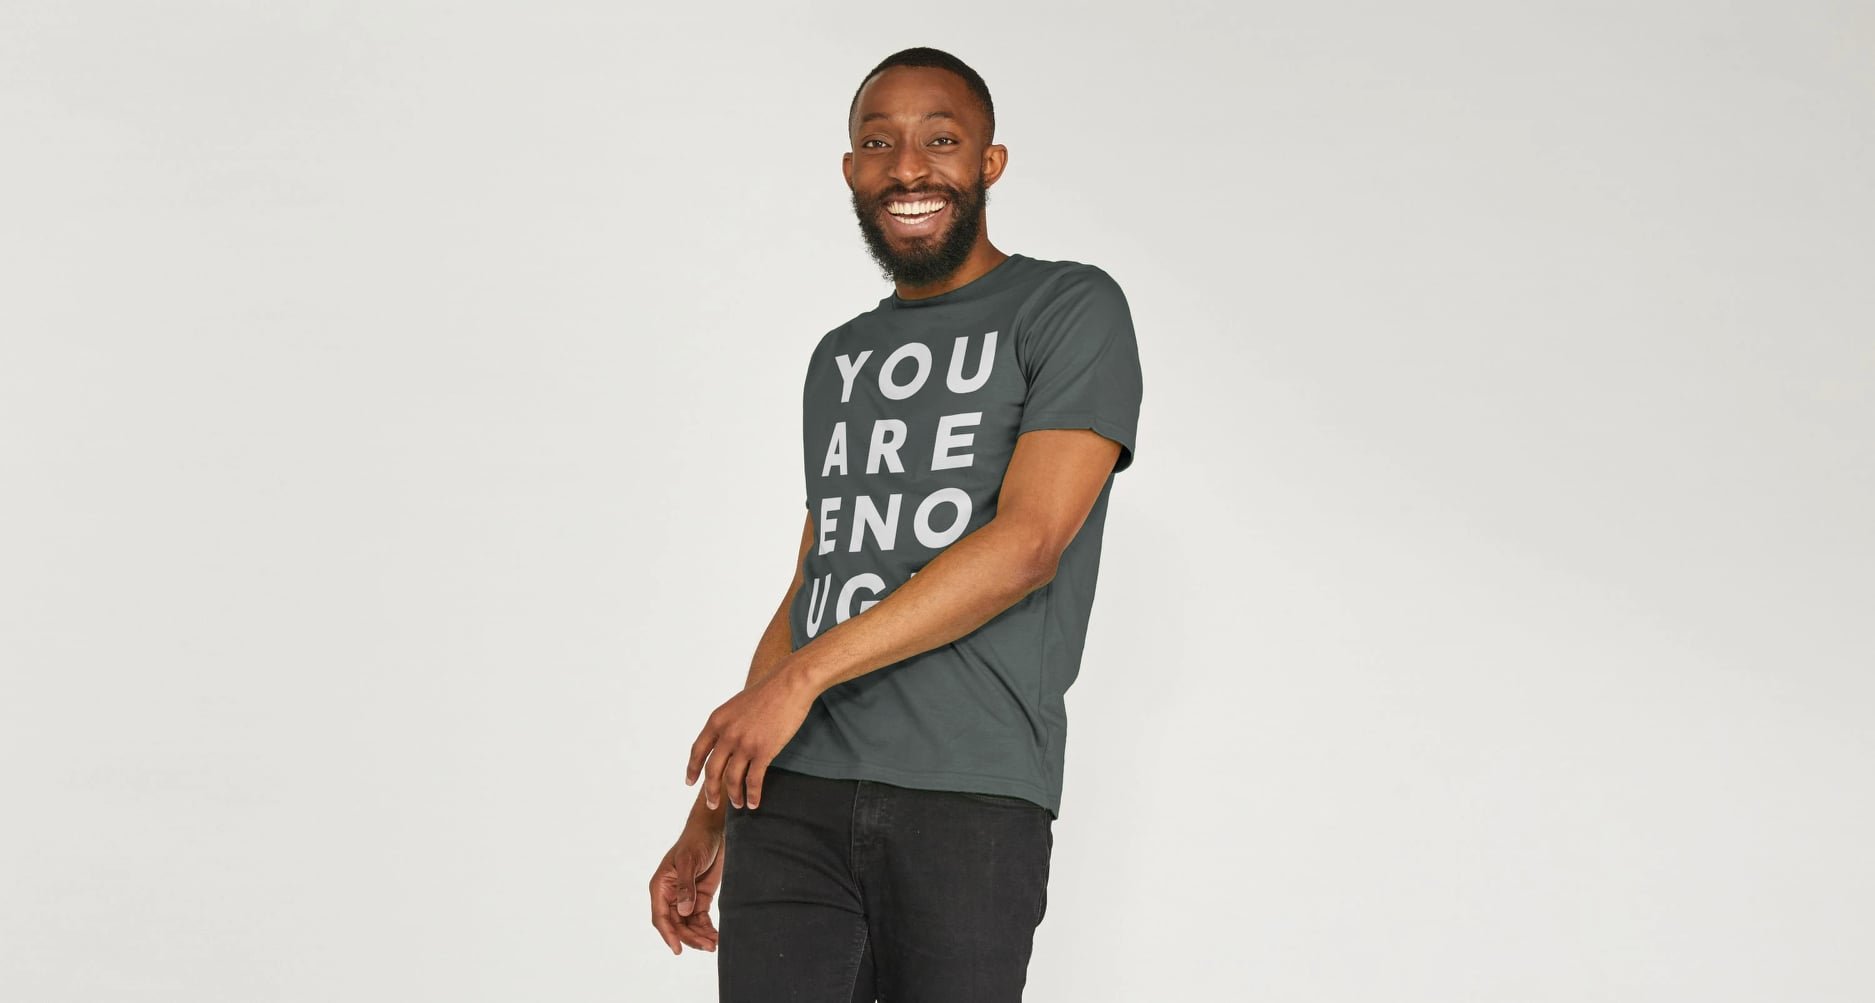 You are enough T-shirt design